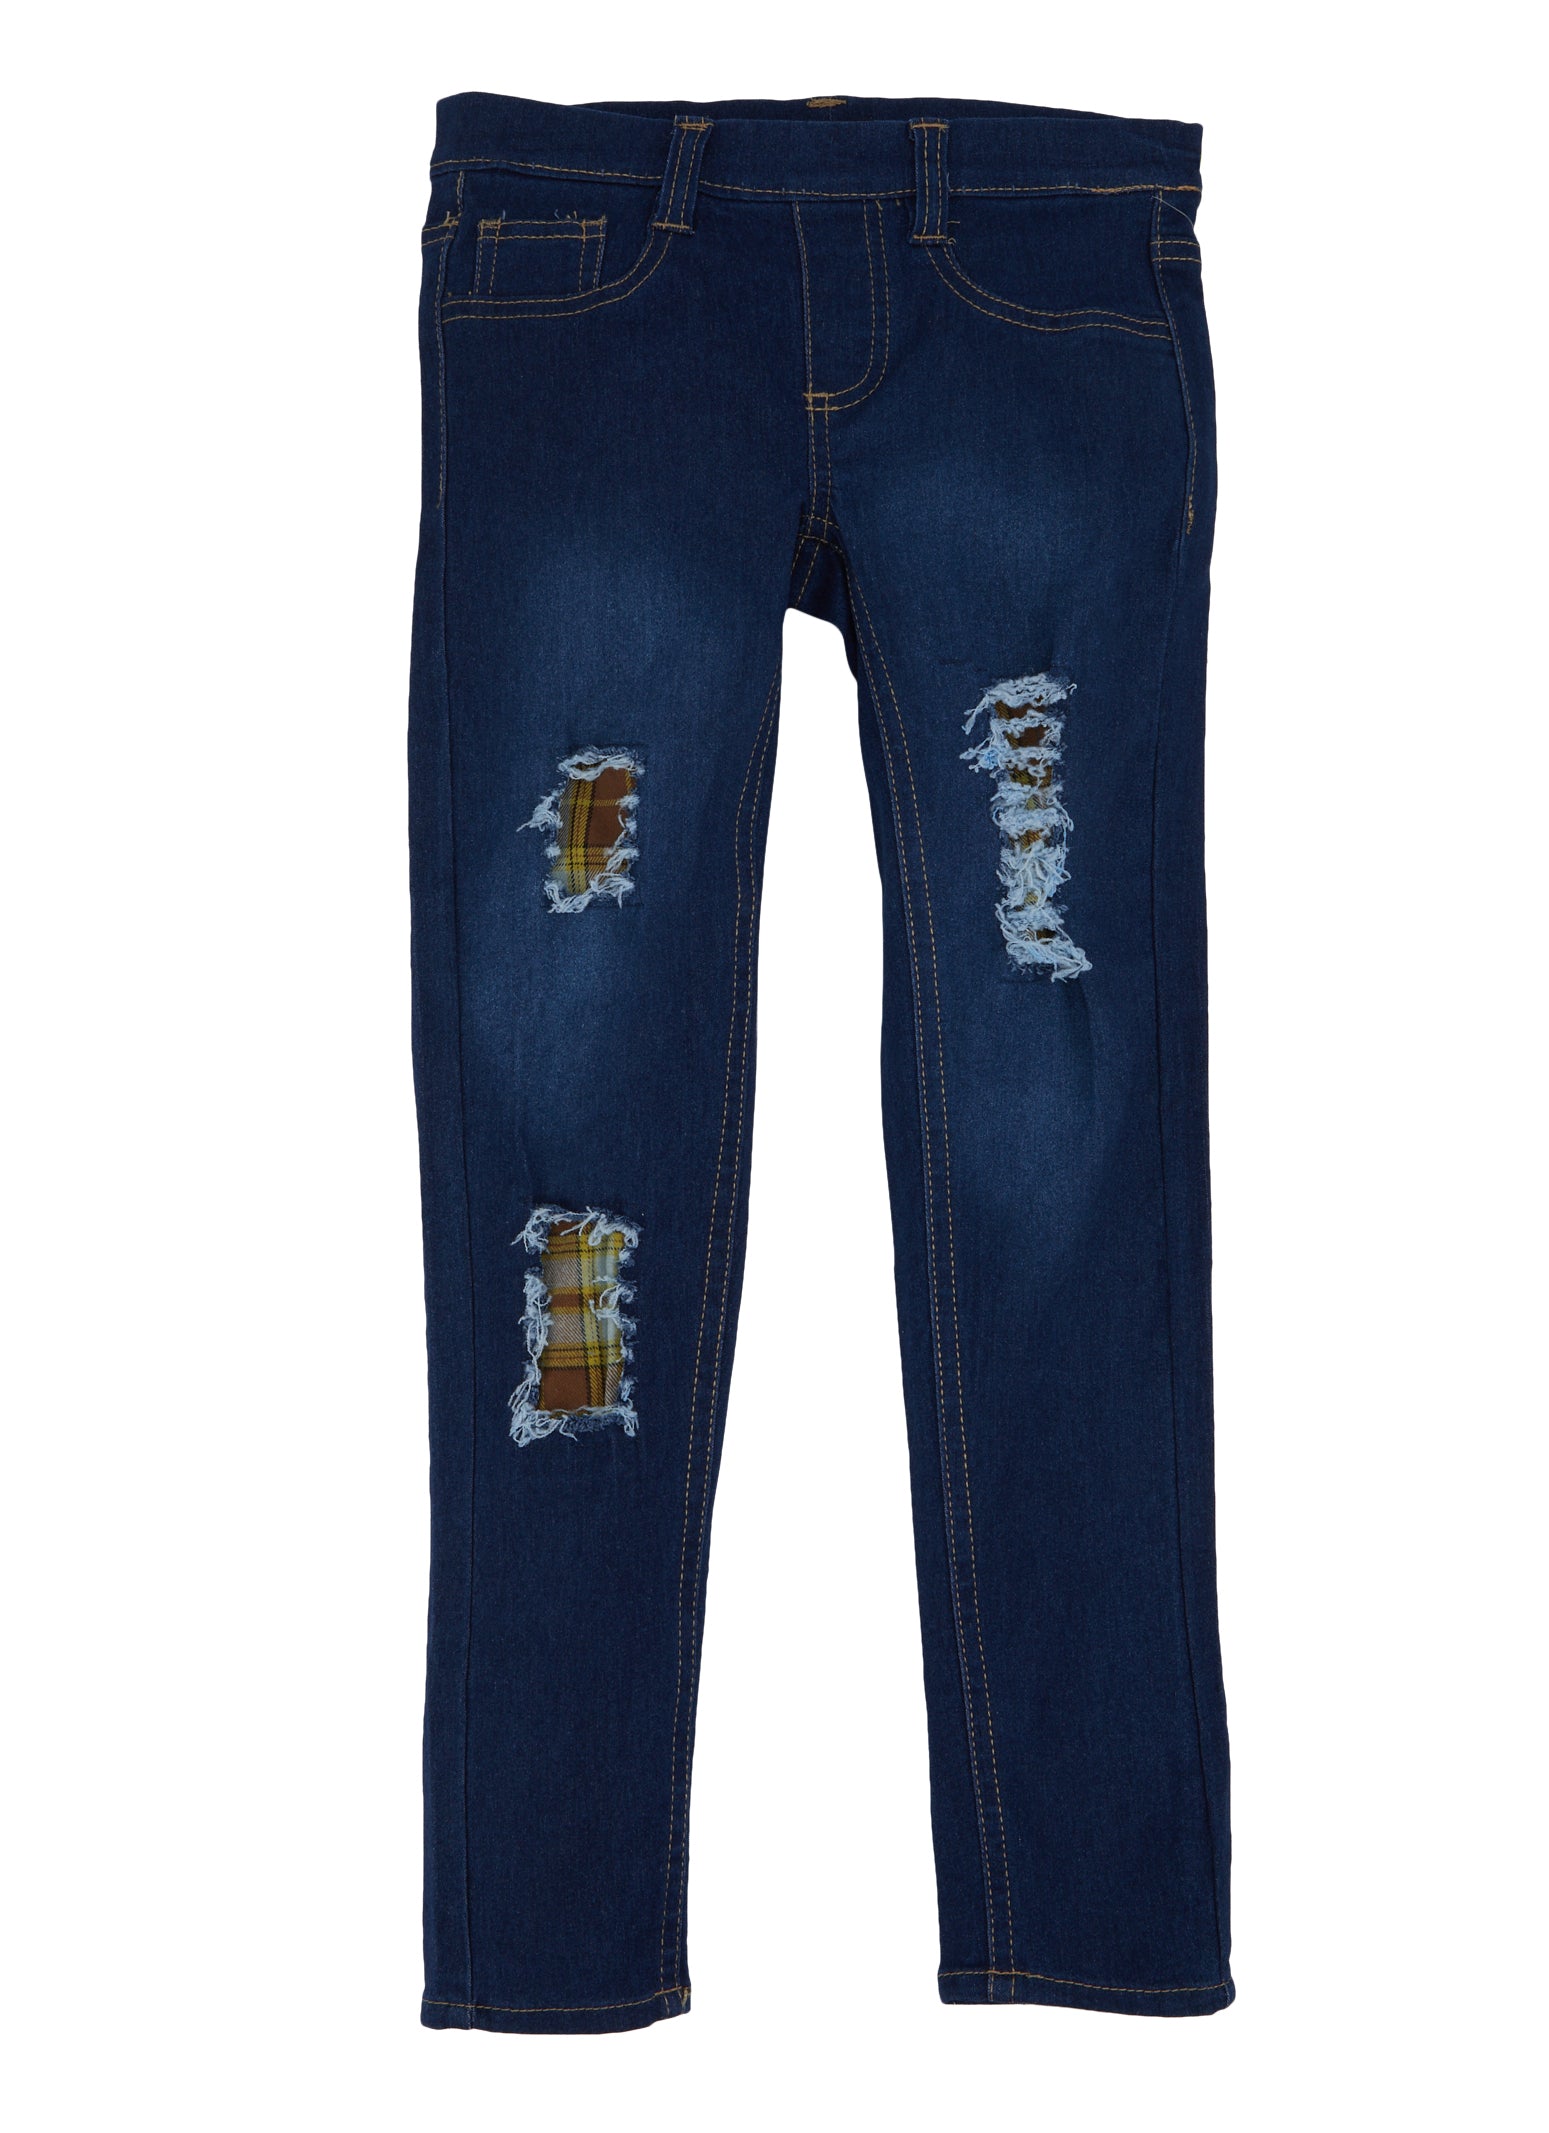 Girls Plaid Insert Patch and Repair Skinny Jeans, Blue,